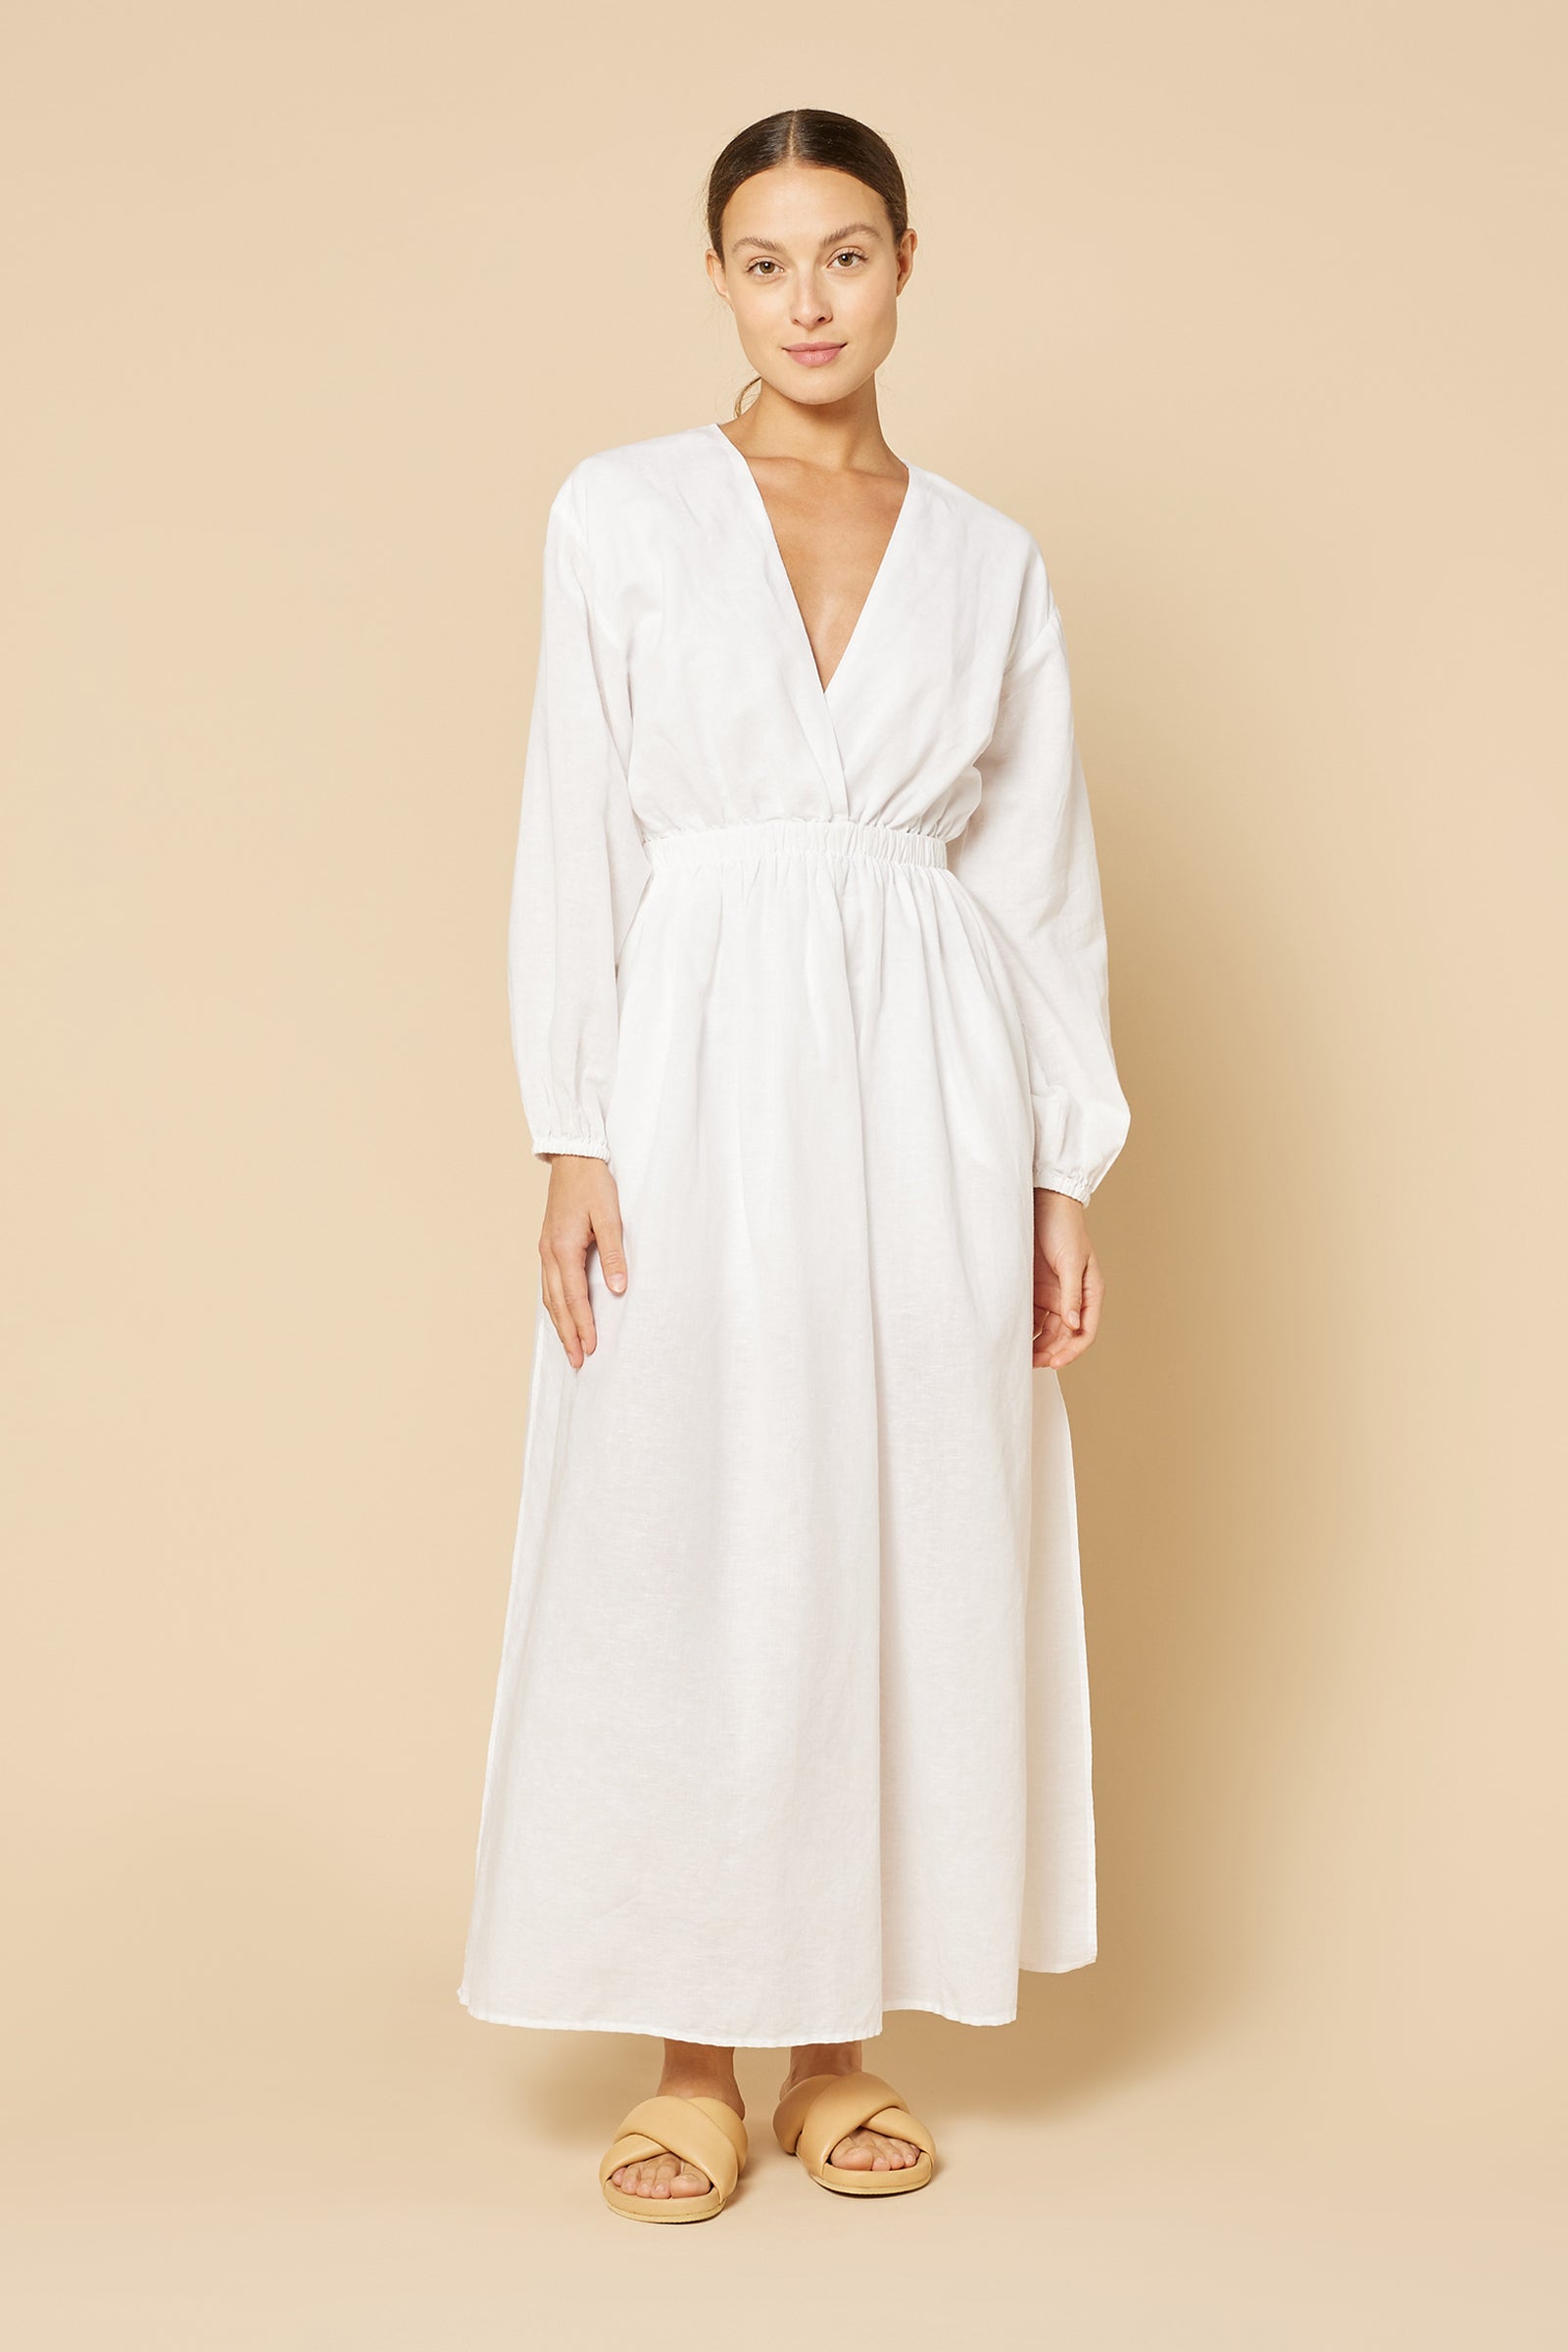 Nude Lucy Neve Maxi Dress in White